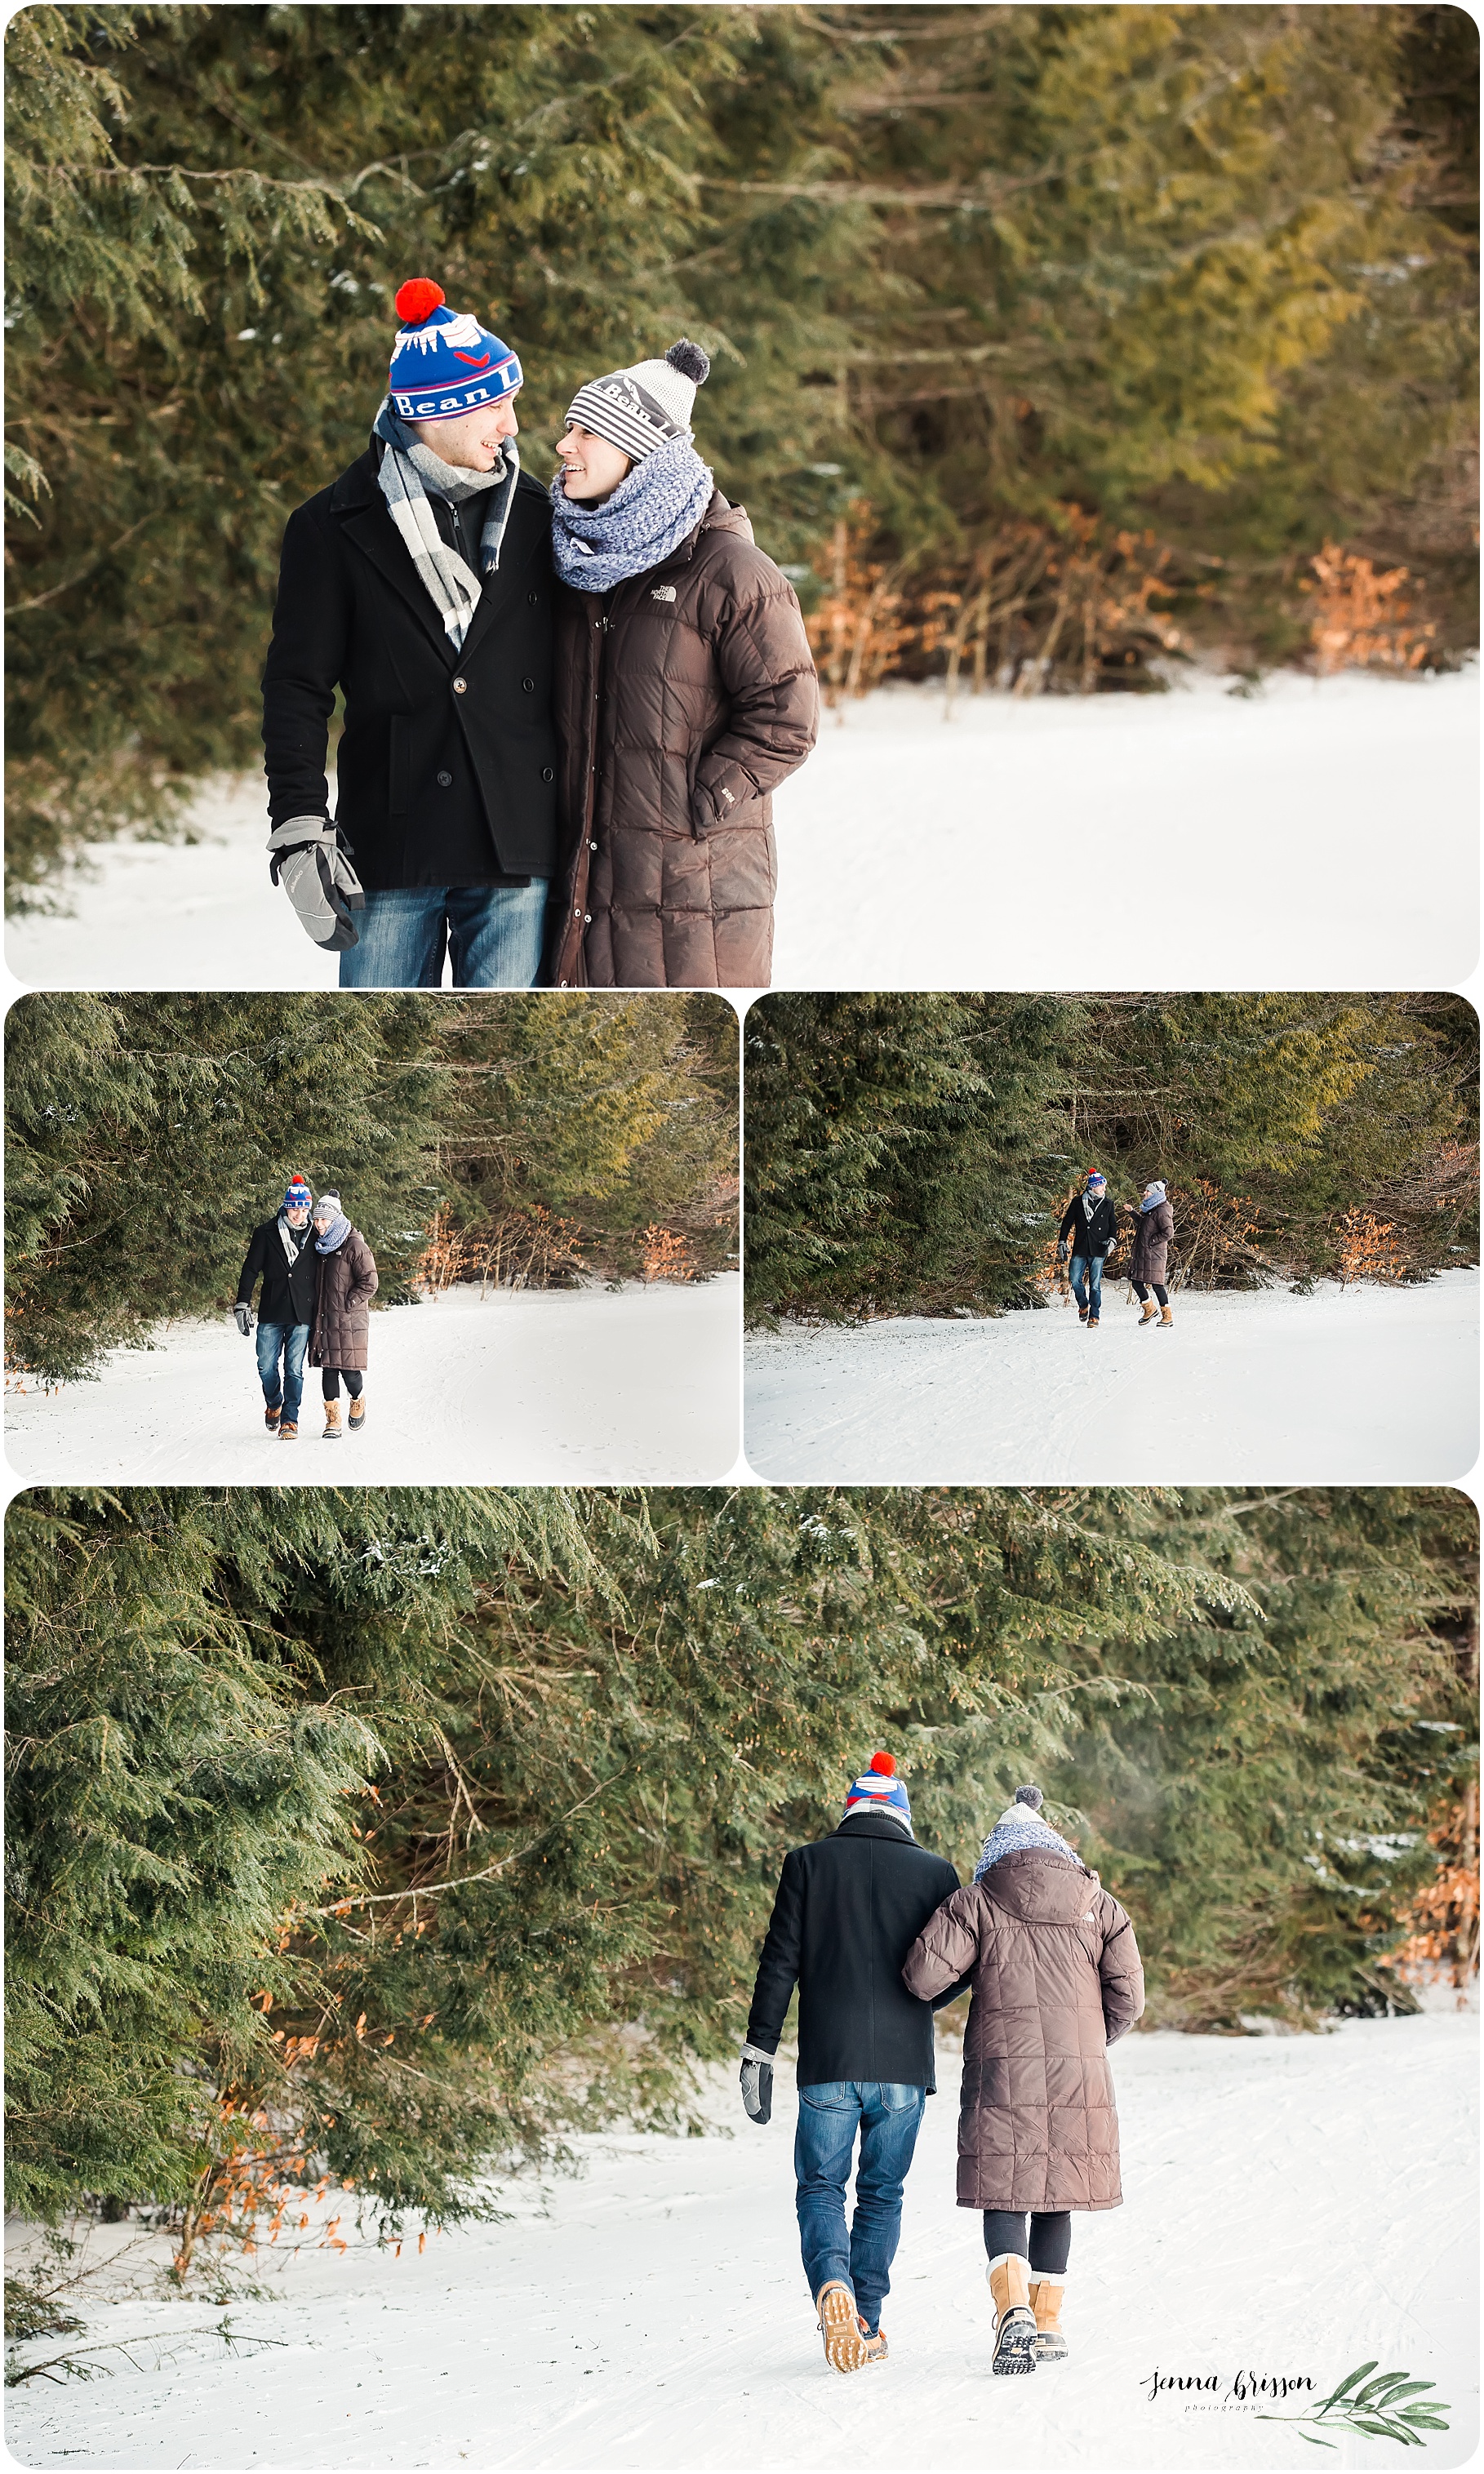 Woodsy Rustic Engagement Photos - Stowe, Vermont - Jenna Brisson Photography